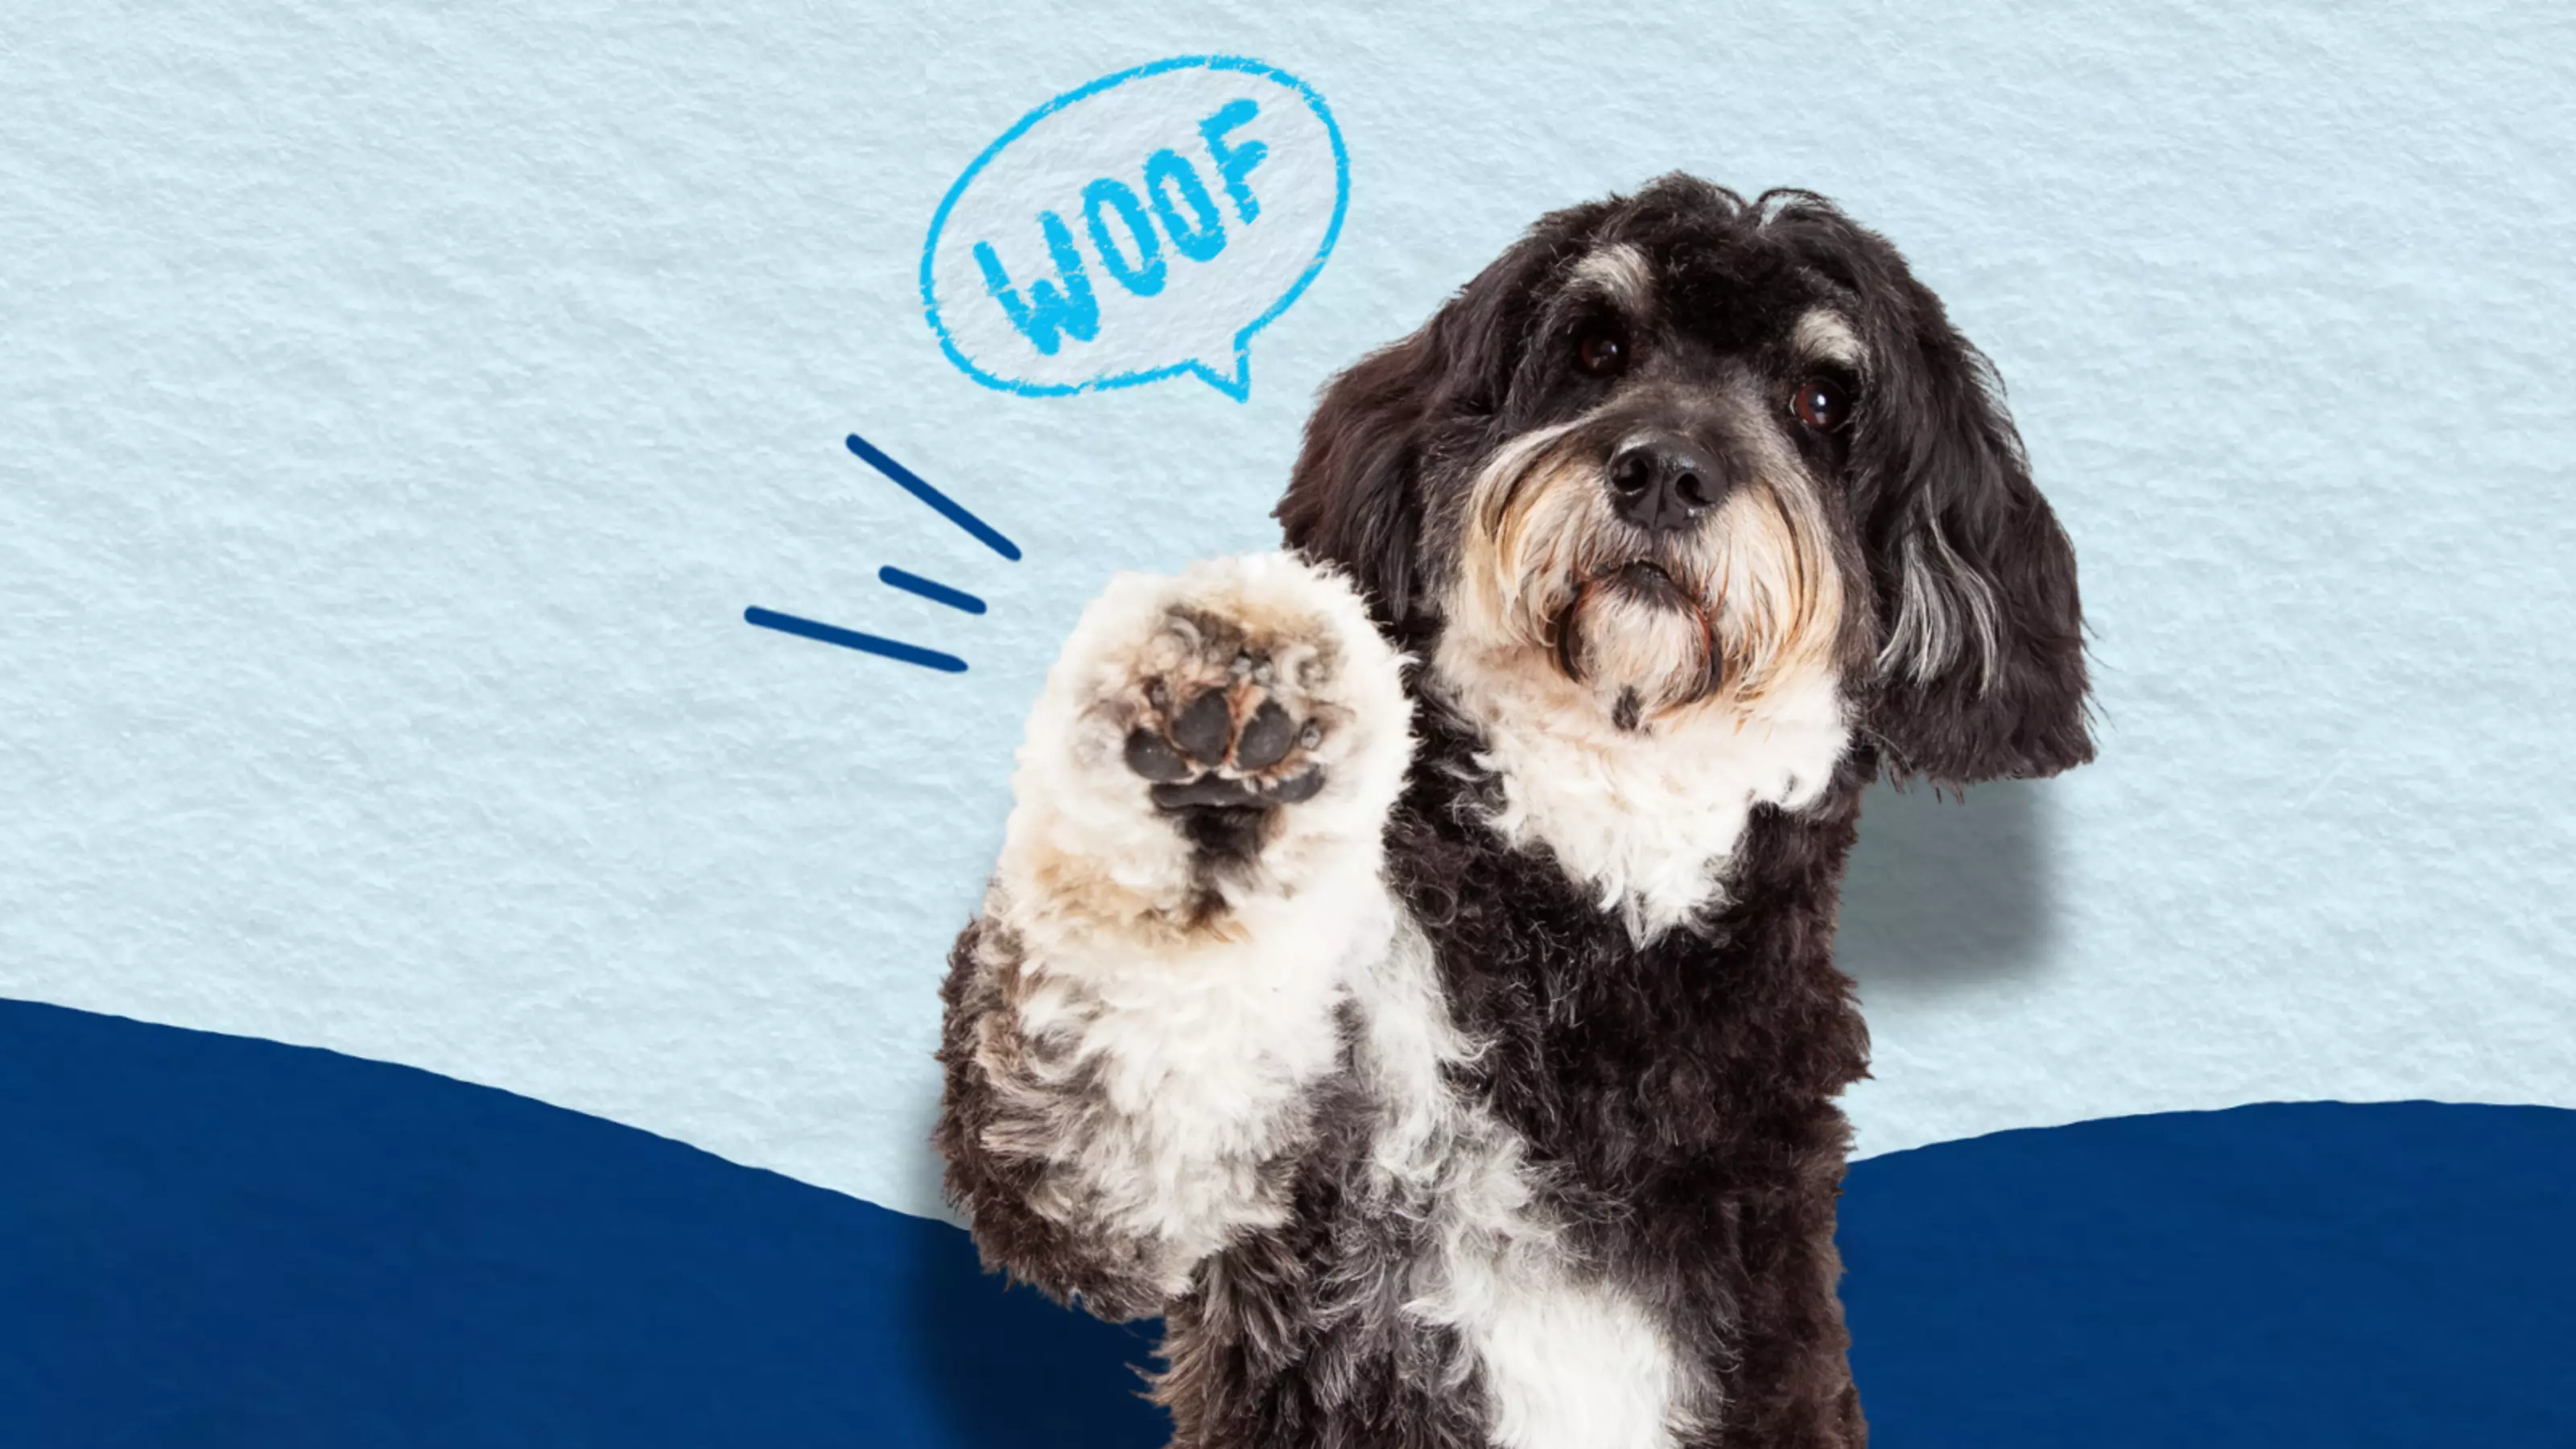 A black and white dog holding his paw up for a high five. The word 'woof' is in a speech bubble next to him.